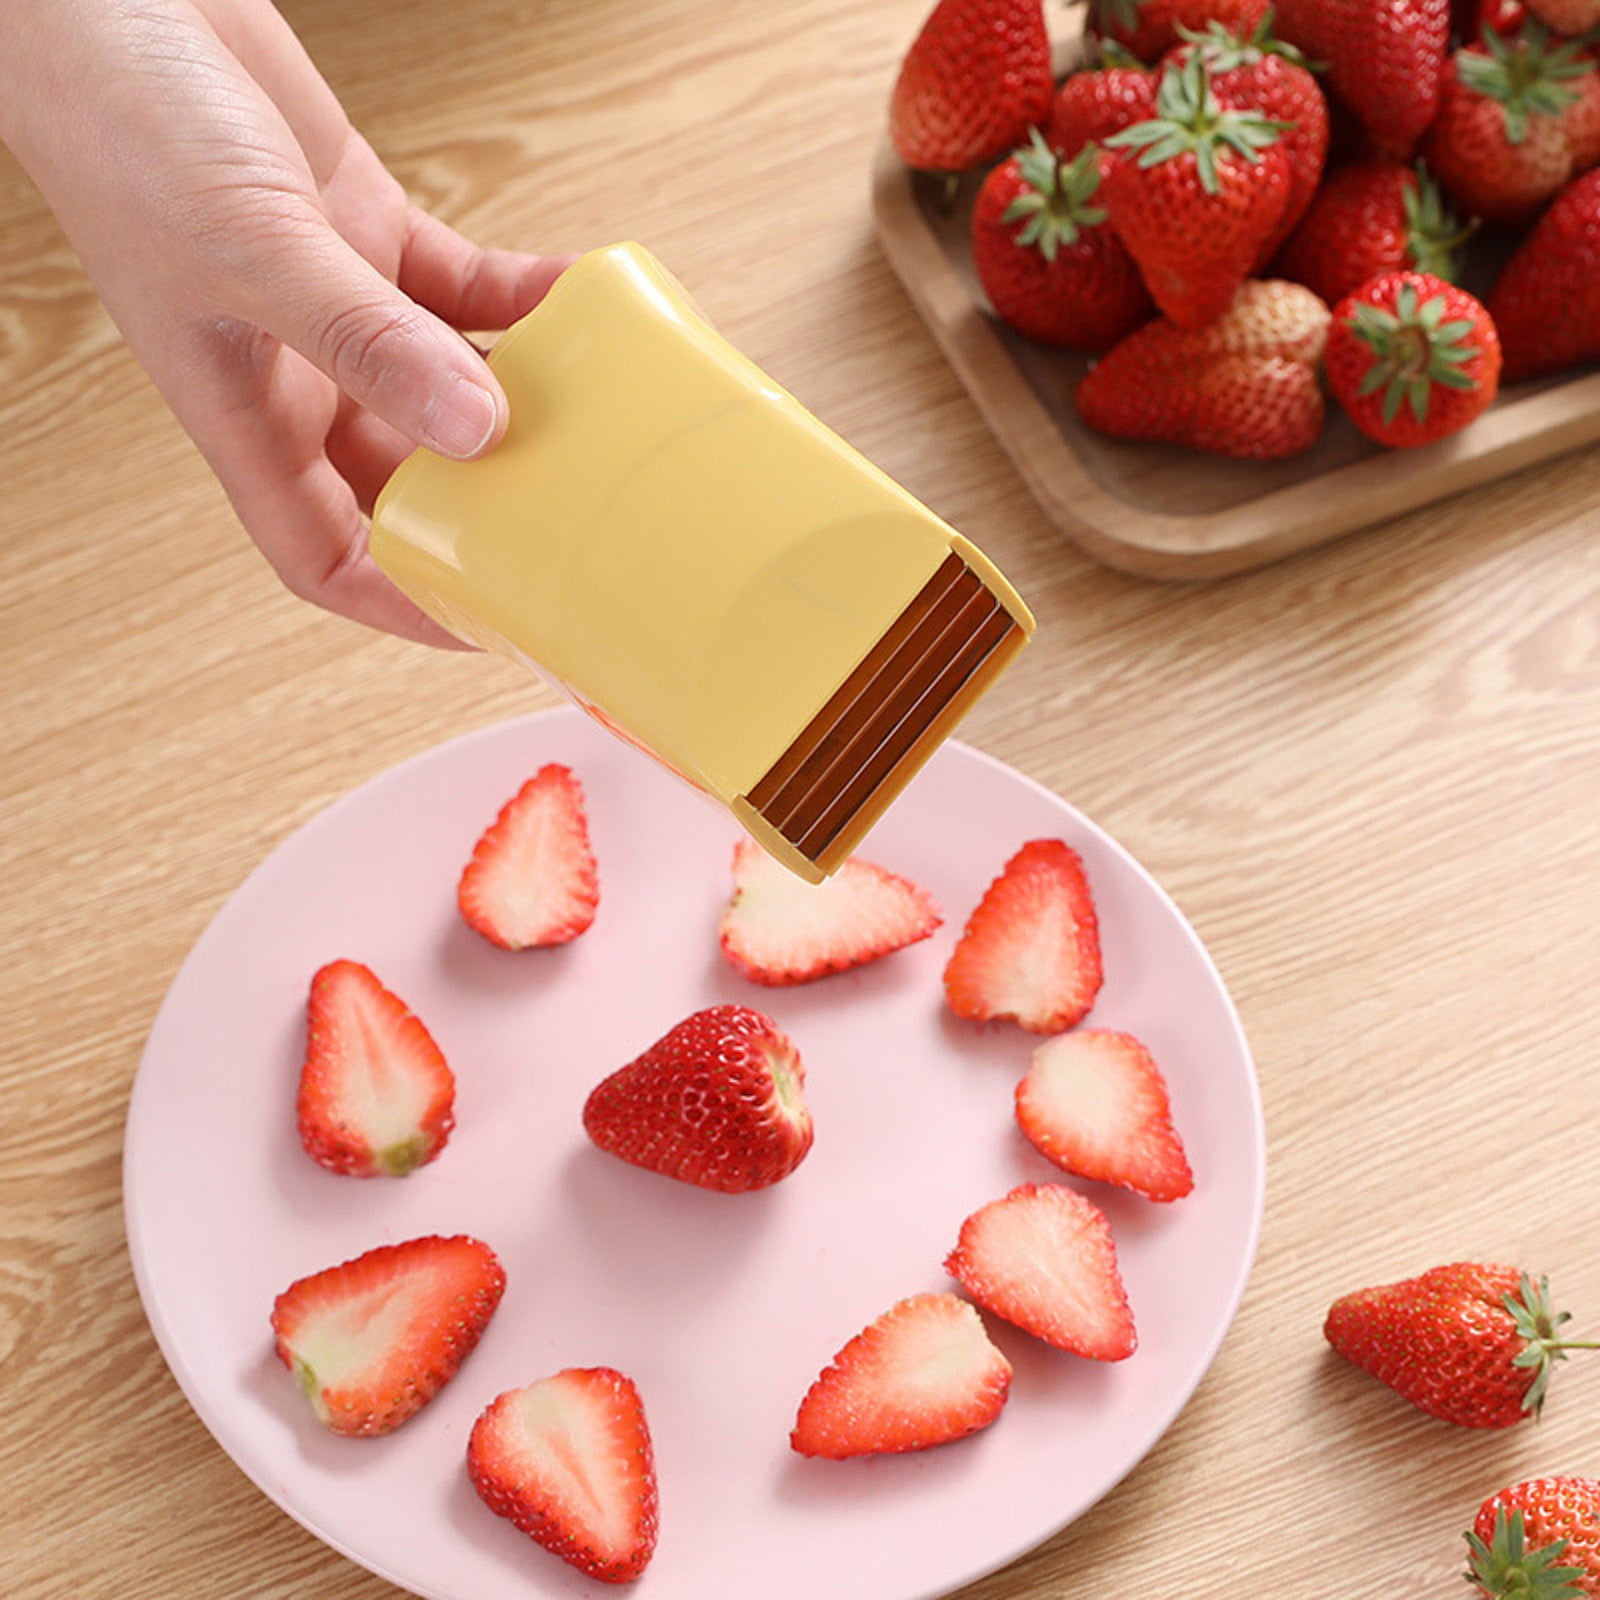 Strawberry Slice. Strawberry Dividers. Cup sliced